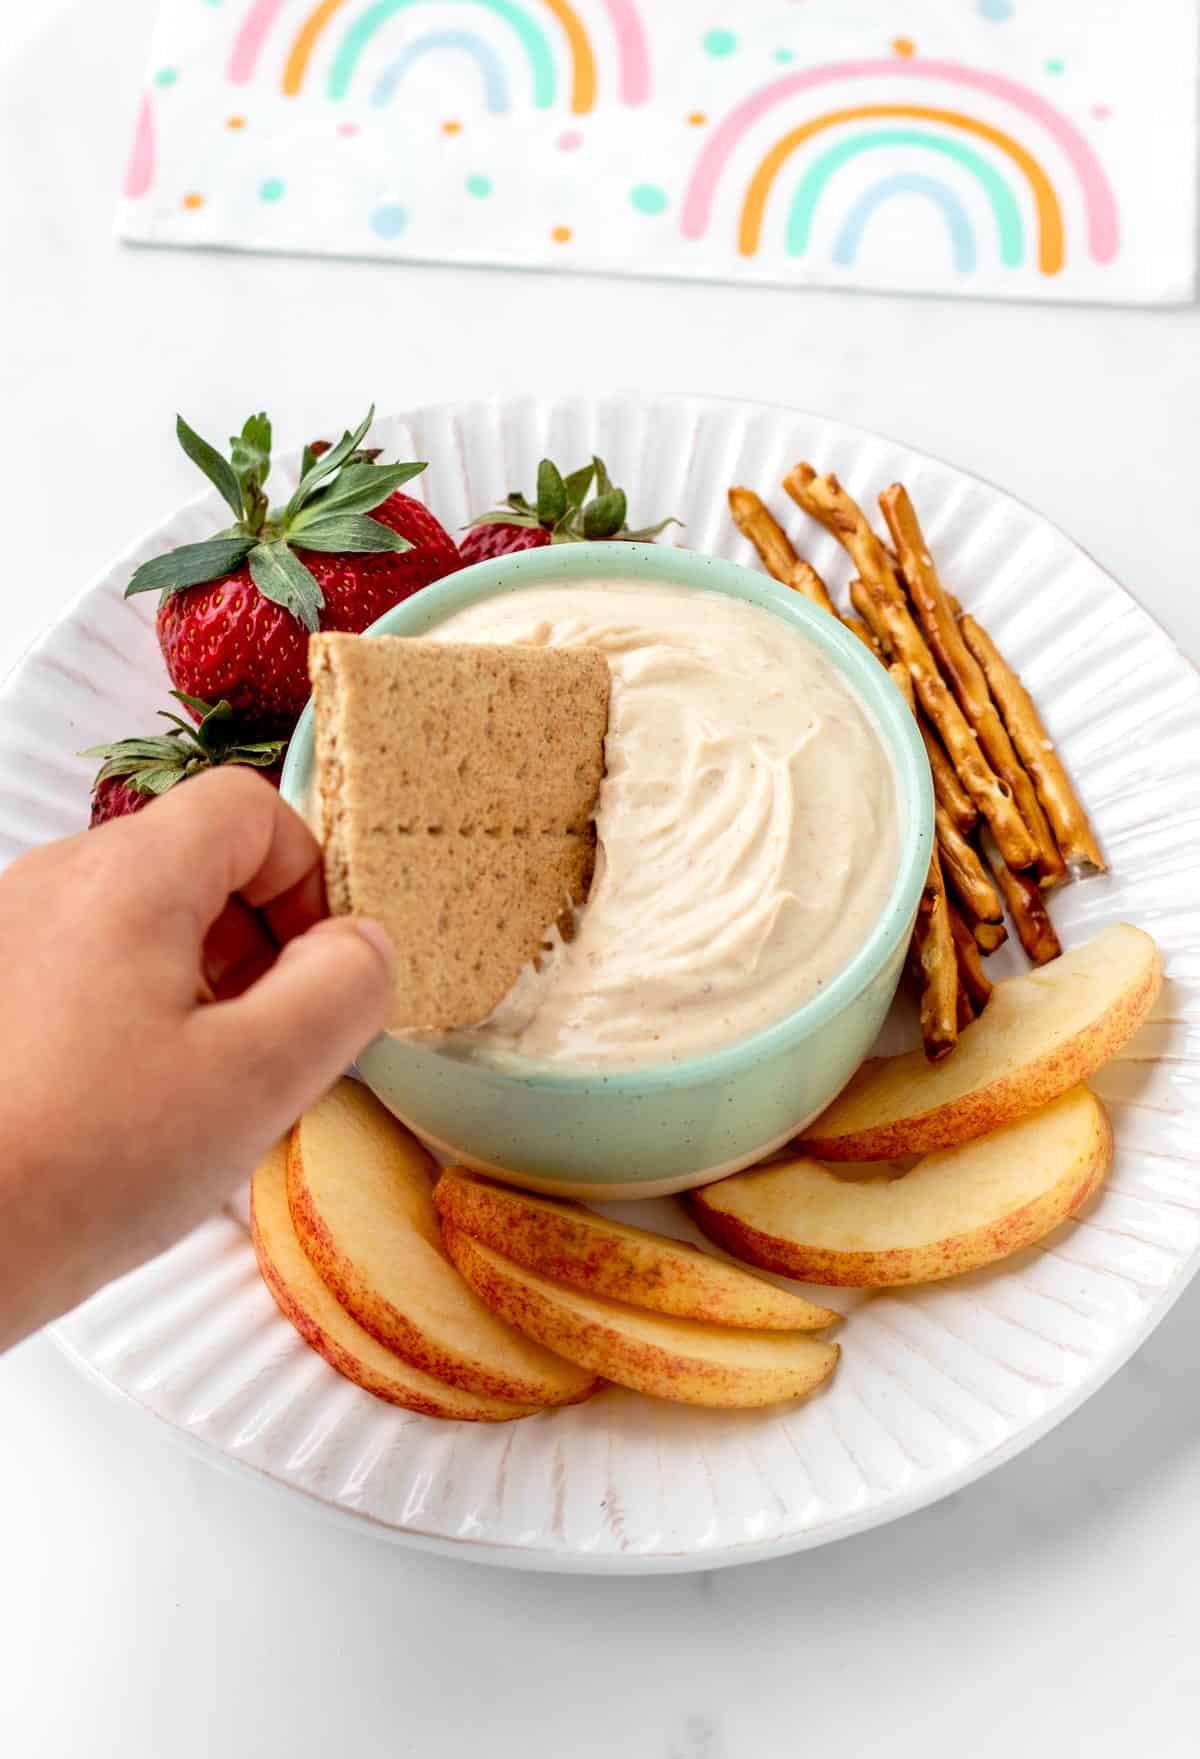 A child's hand dipping a graham cracker into a bowl of 4-ingredient peanut butter dip.